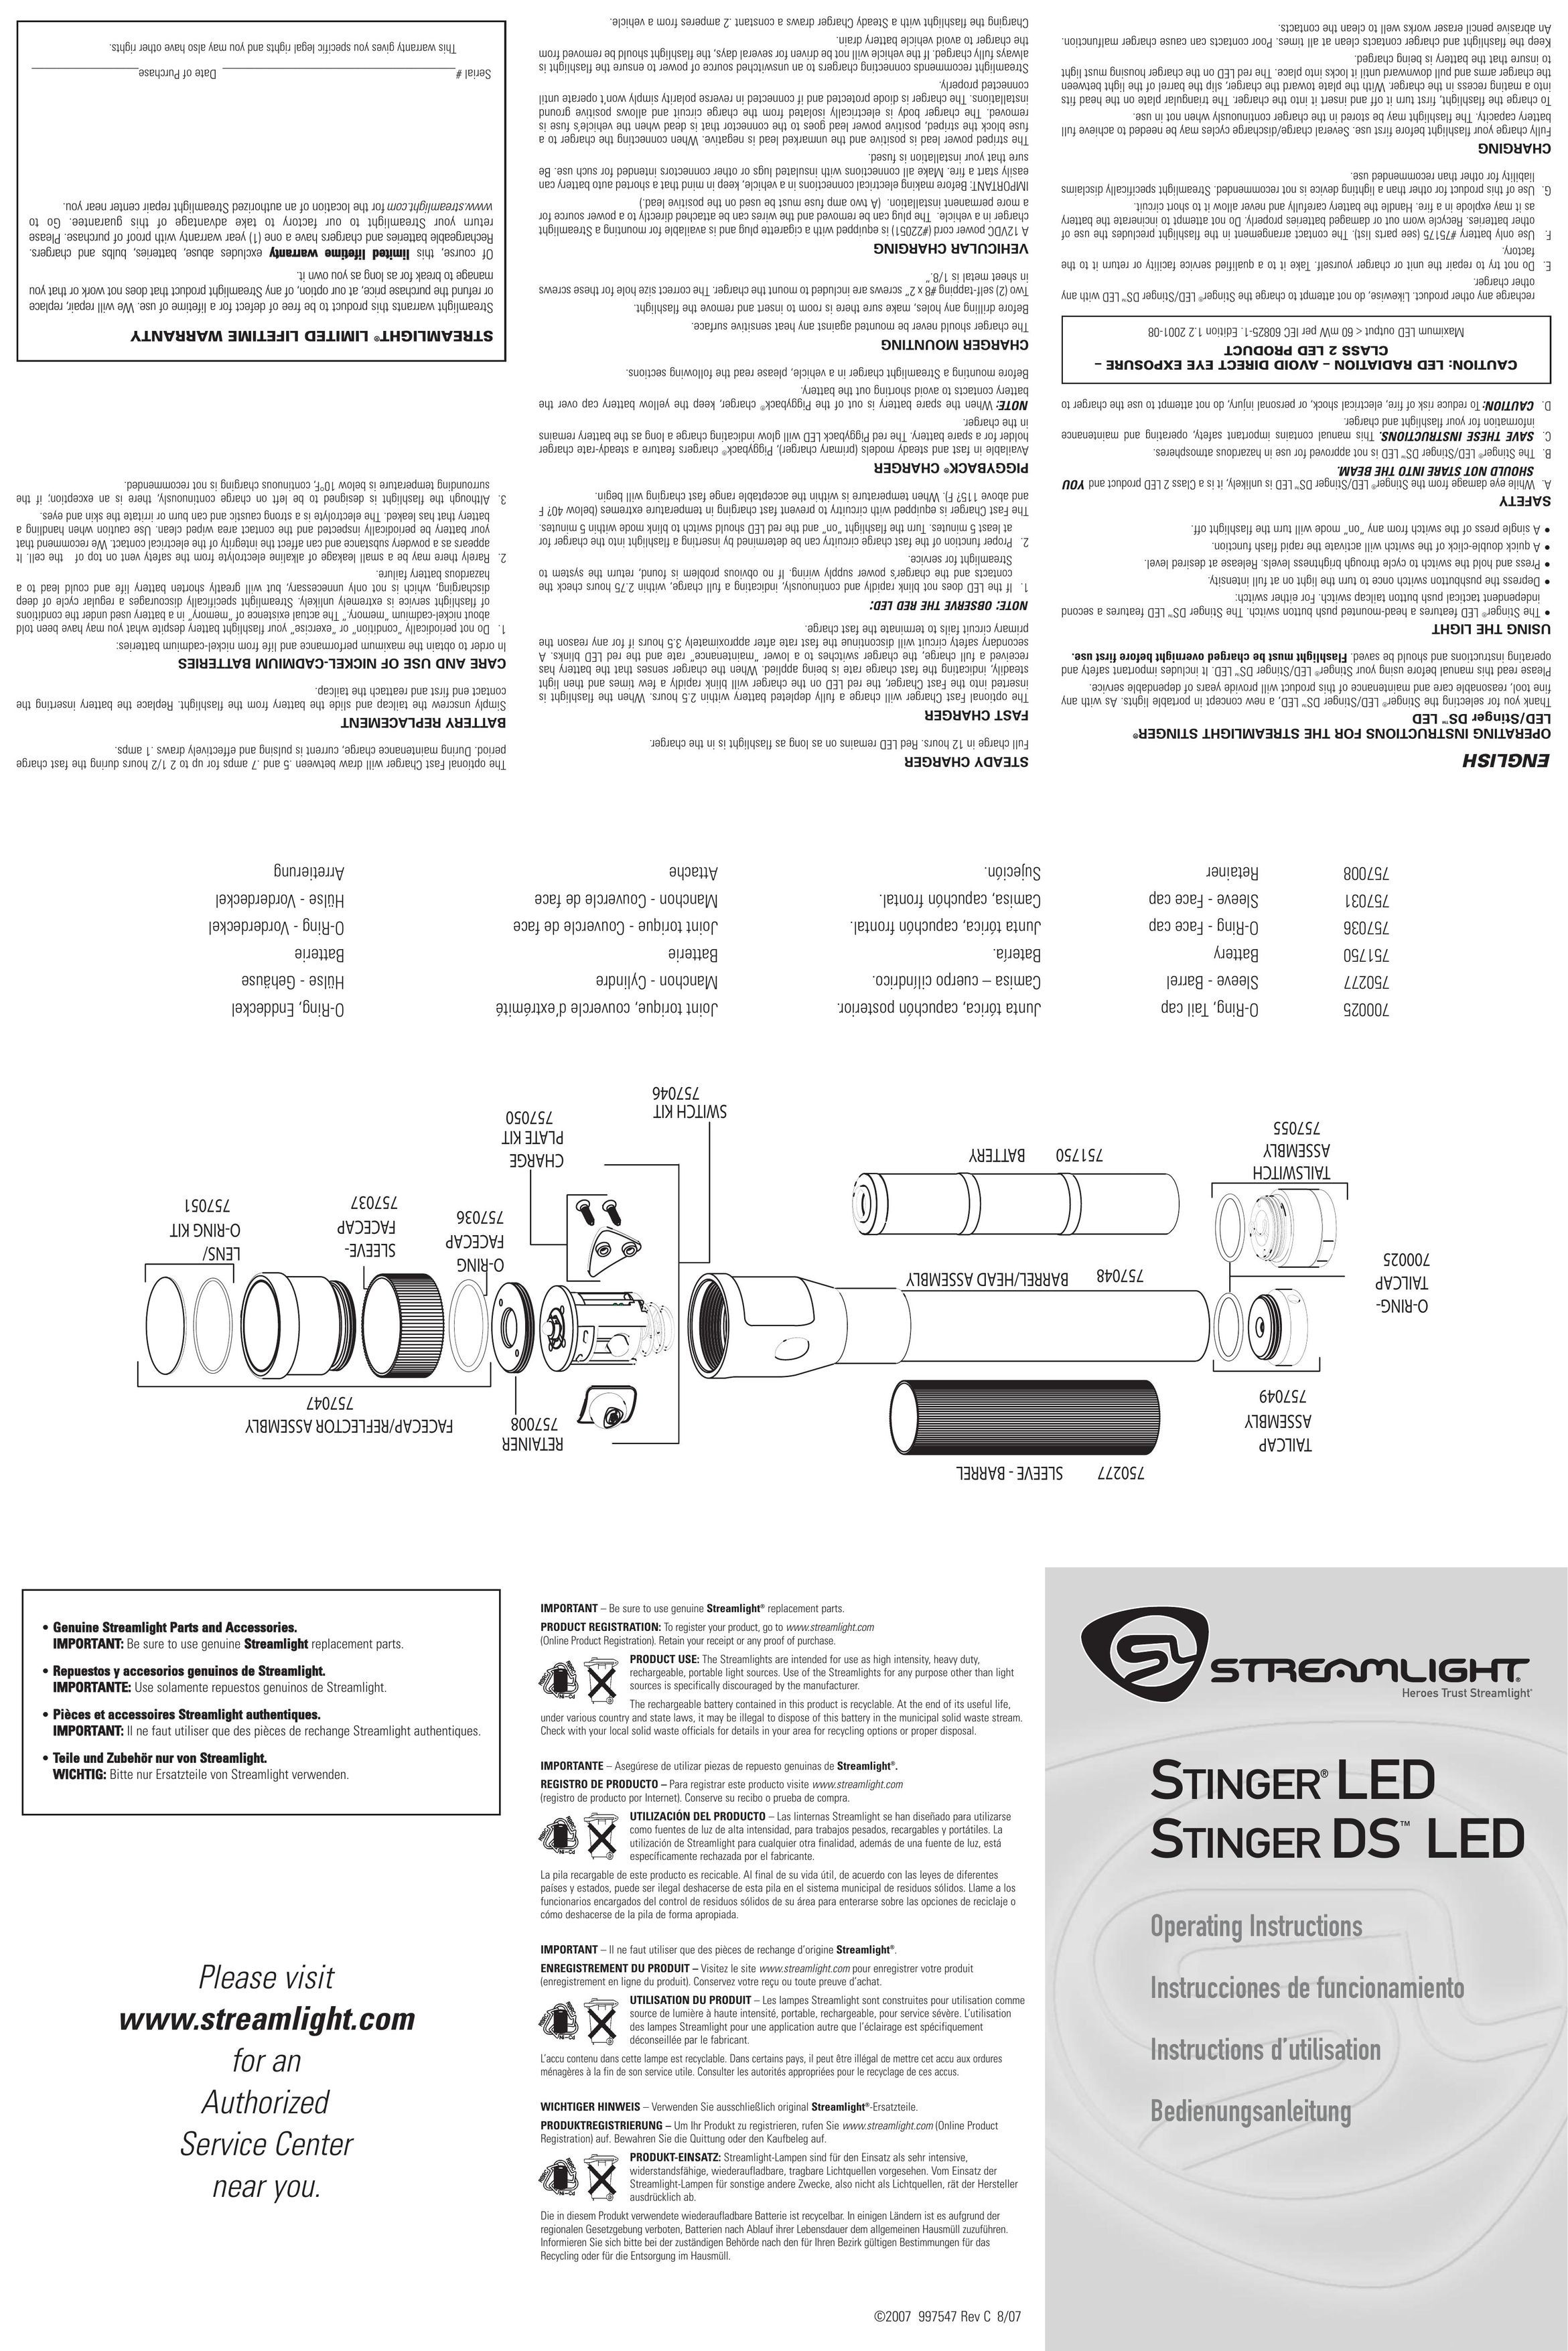 StreamLight 750277 Home Safety Product User Manual